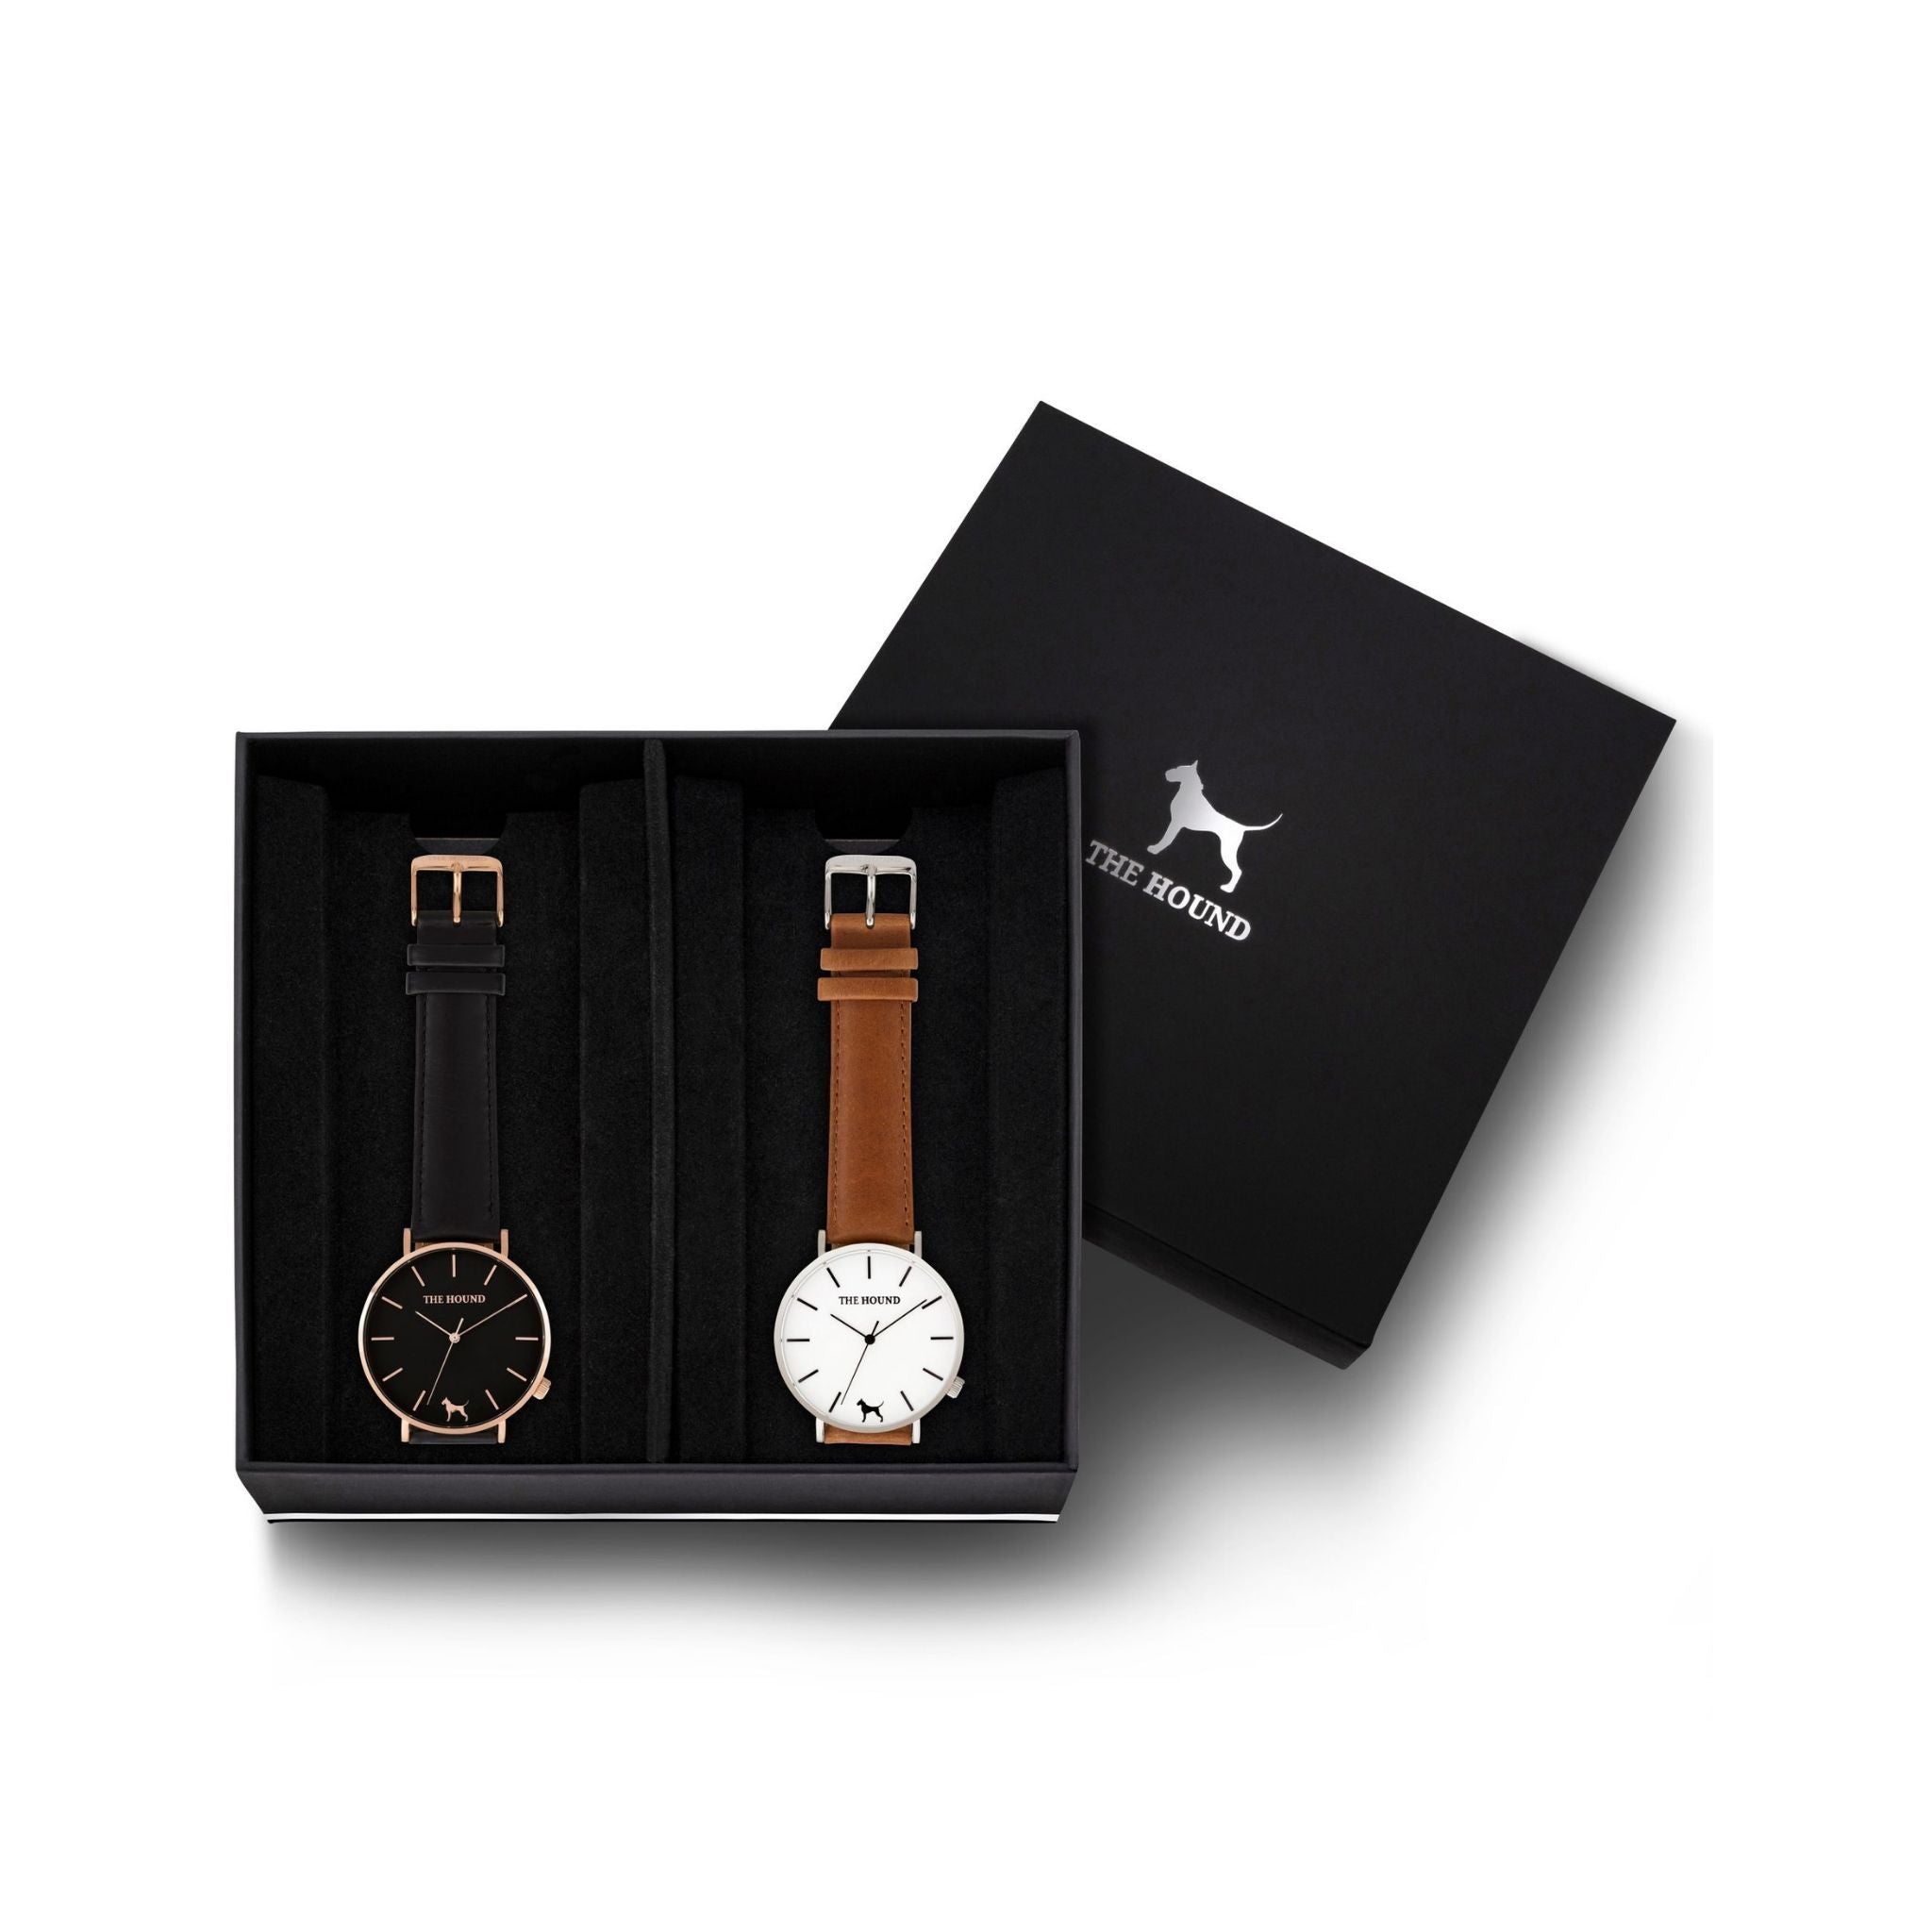 Custom gift set - Rose gold and black watch with stitched black genuine leather band and a silver and white watch with stitched tan genuine leather band